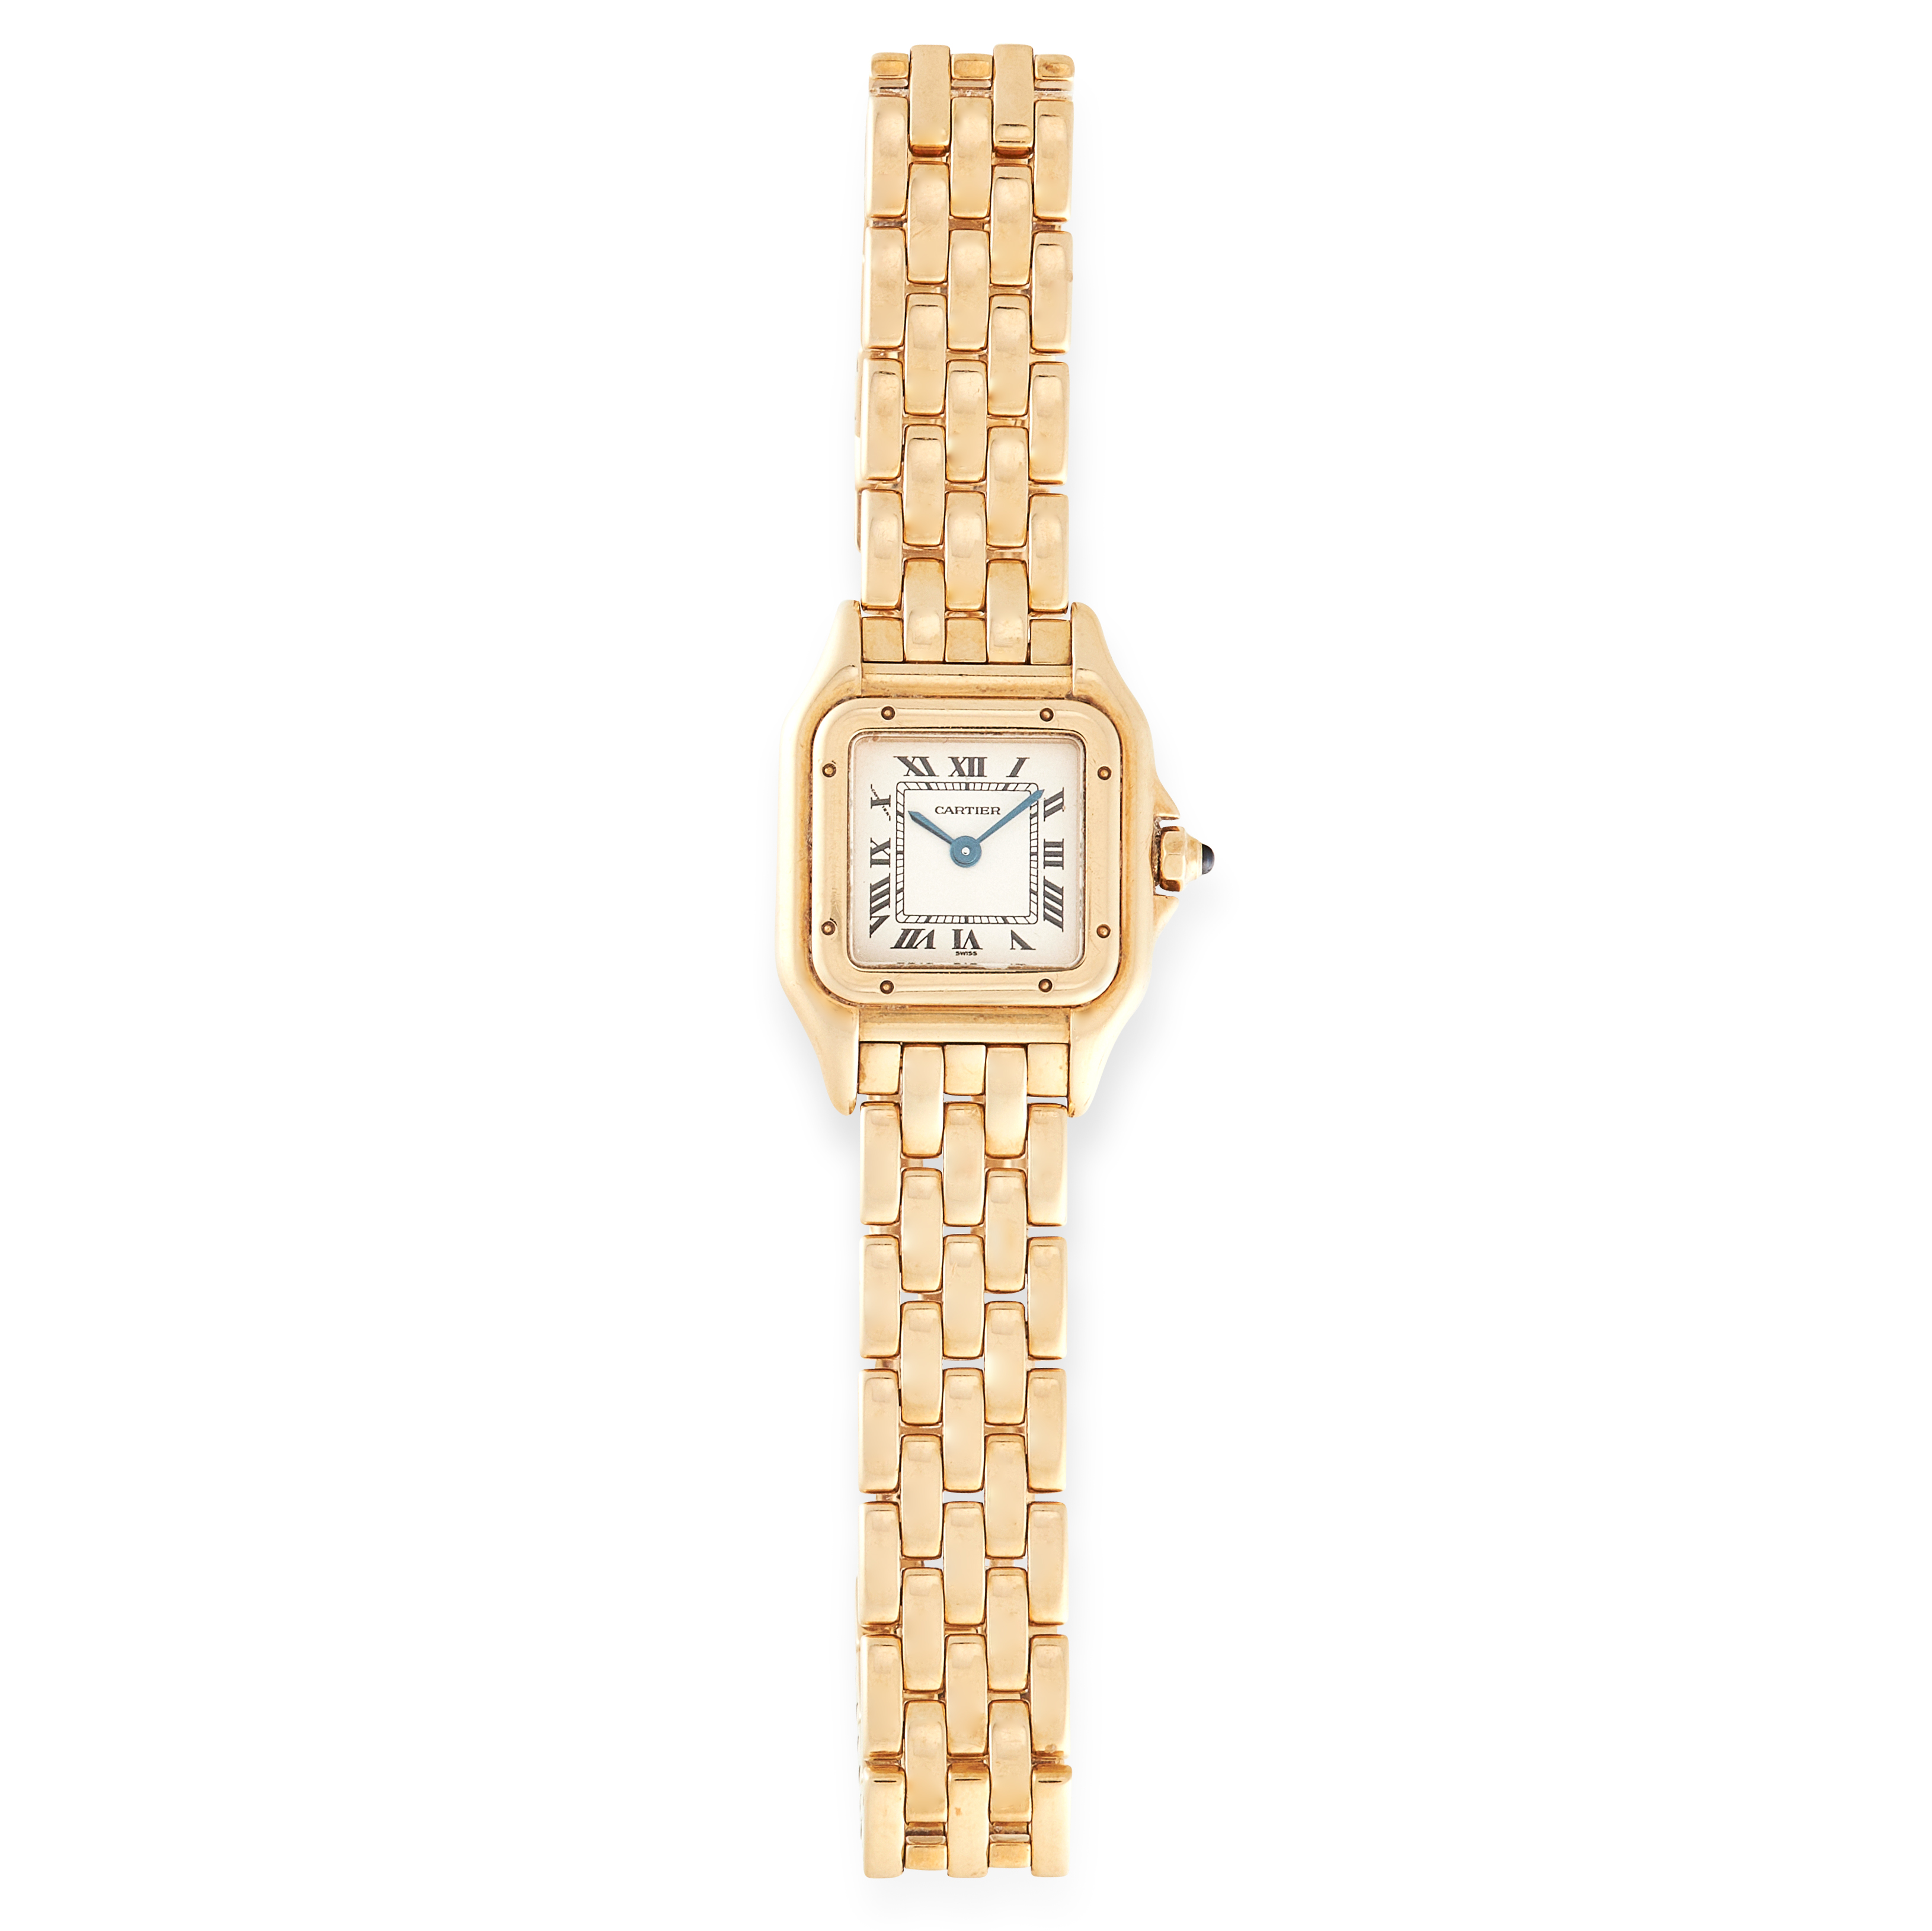 A LADIES PANTHERE DE CARTIER WRIST WATCH, CARTIER in 18ct yellow gold, the face with Roman numerals,